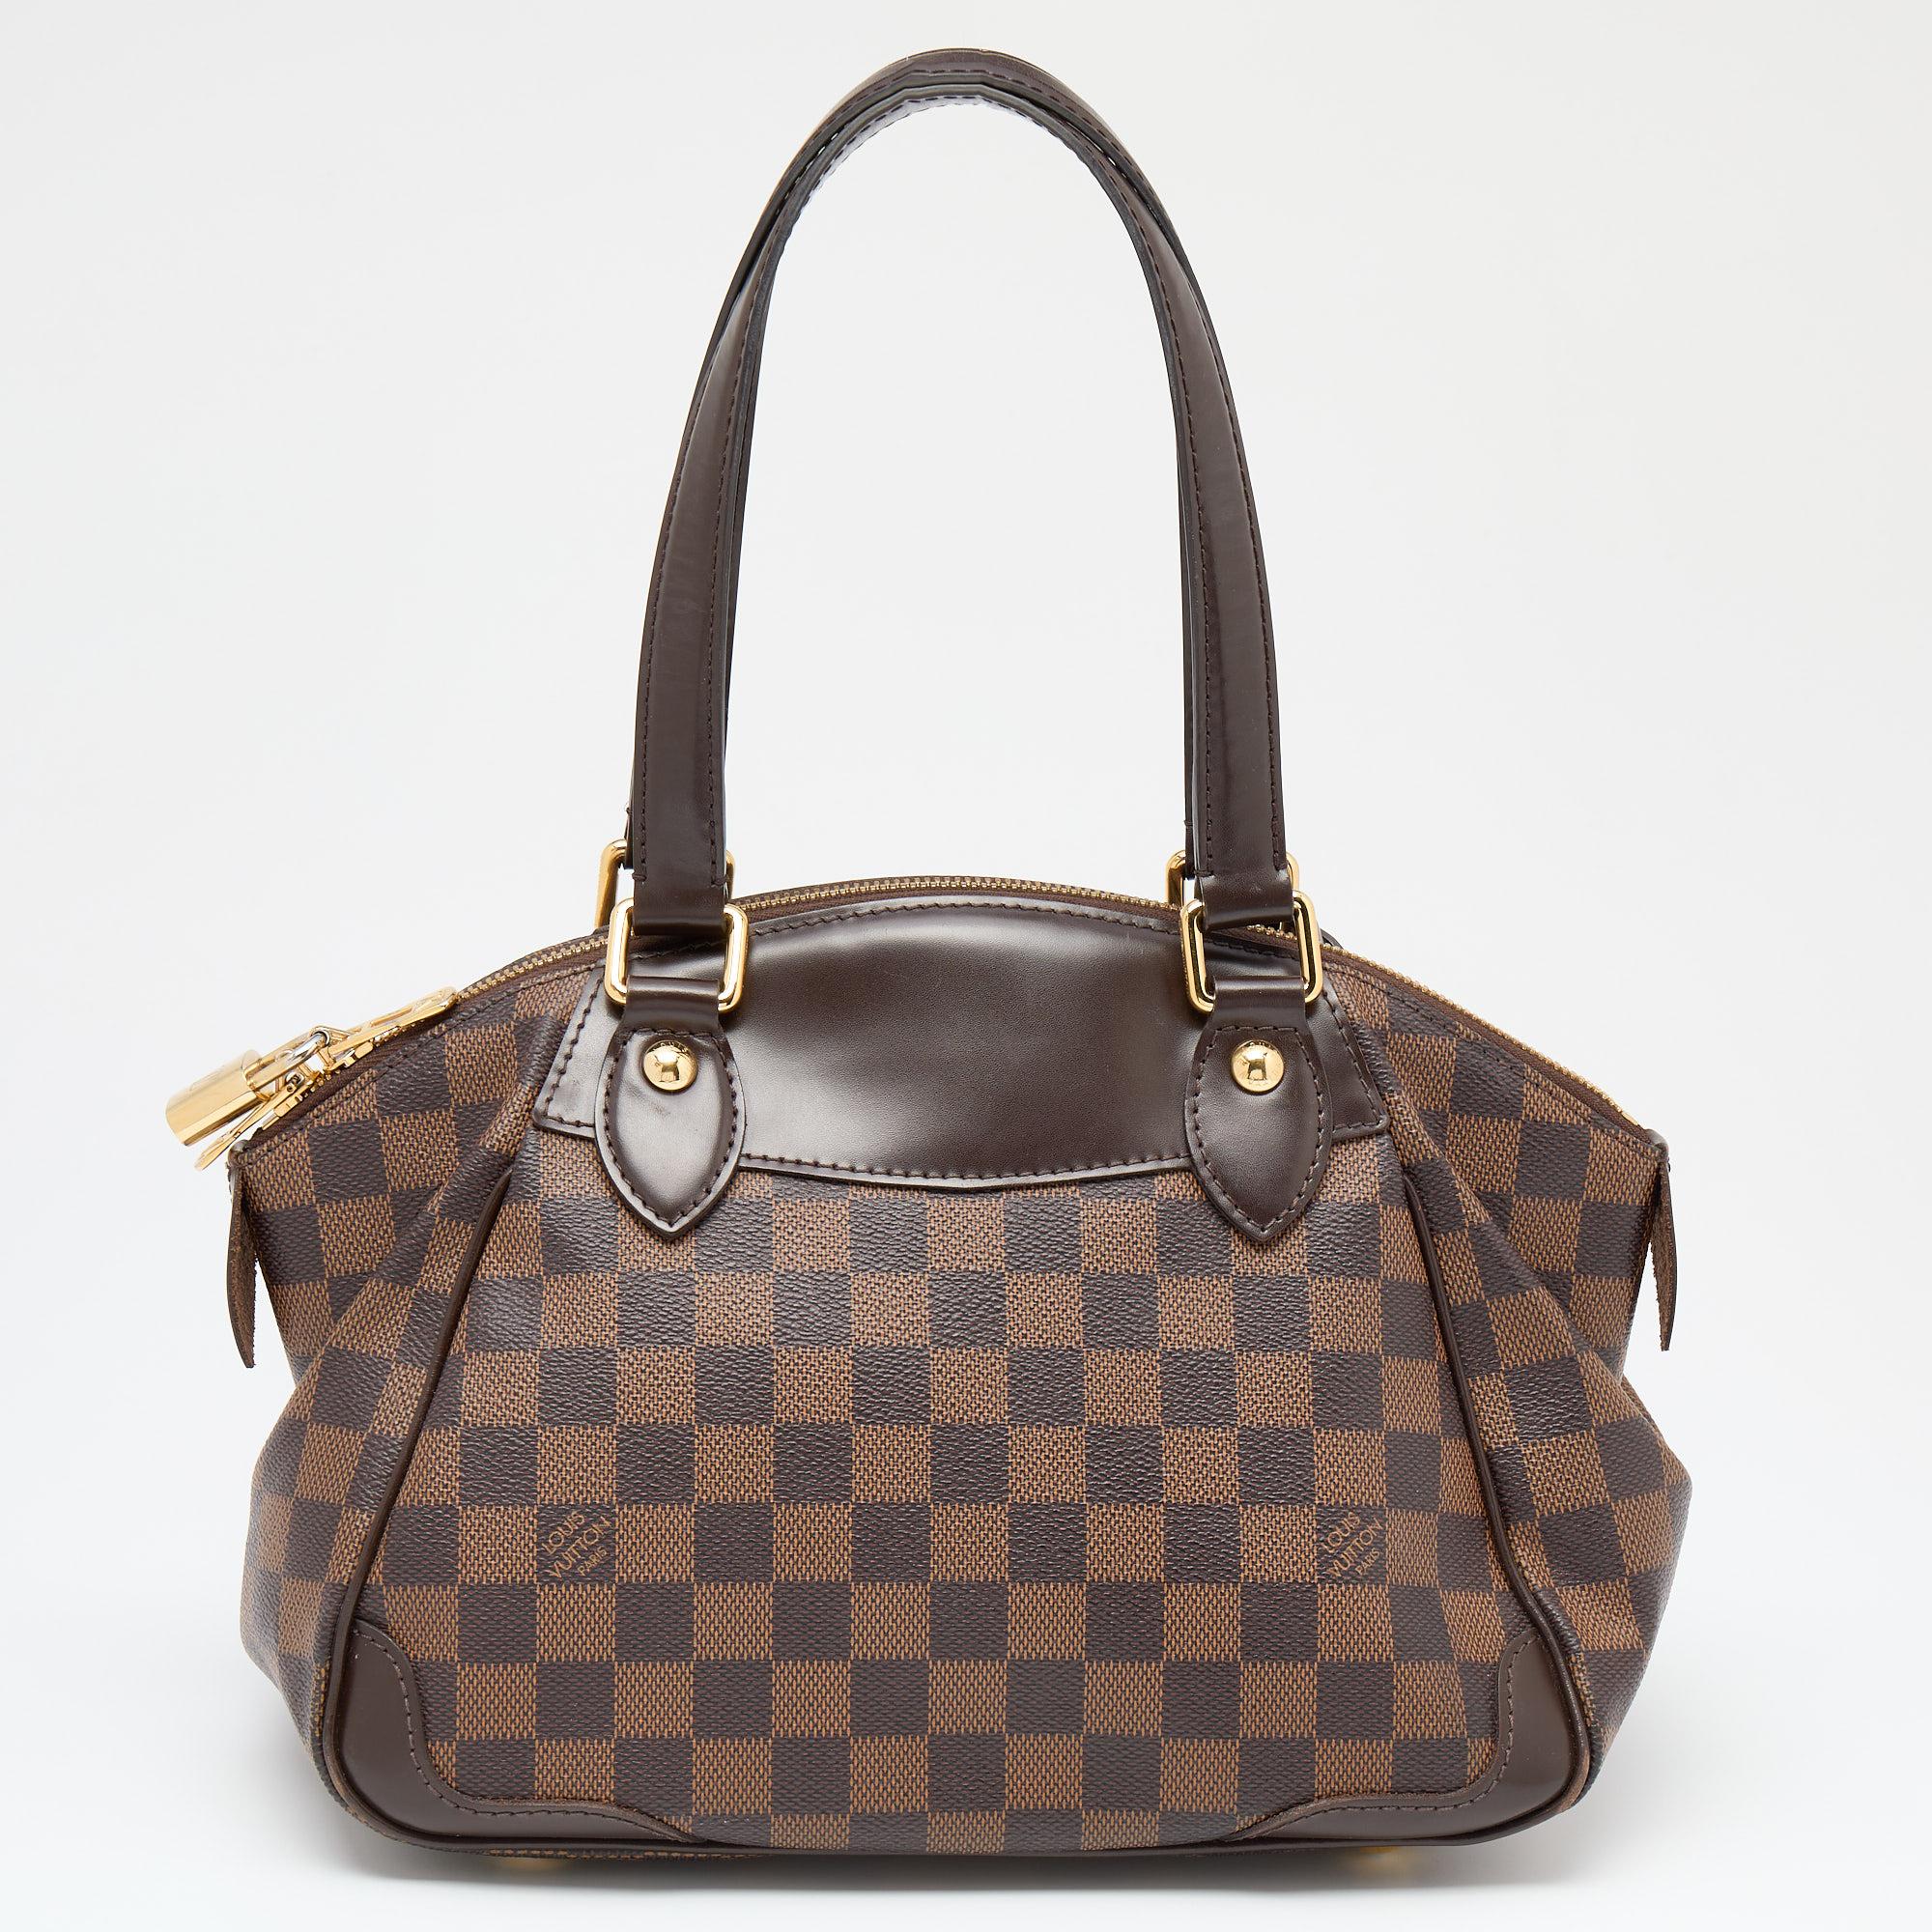 Add this Louis Vuitton bag to your closet for an instant fashion upgrade. It is made from coated canvas and leather and features gold-tone hardware, dual handles, and a capacious interior to hold your important items.